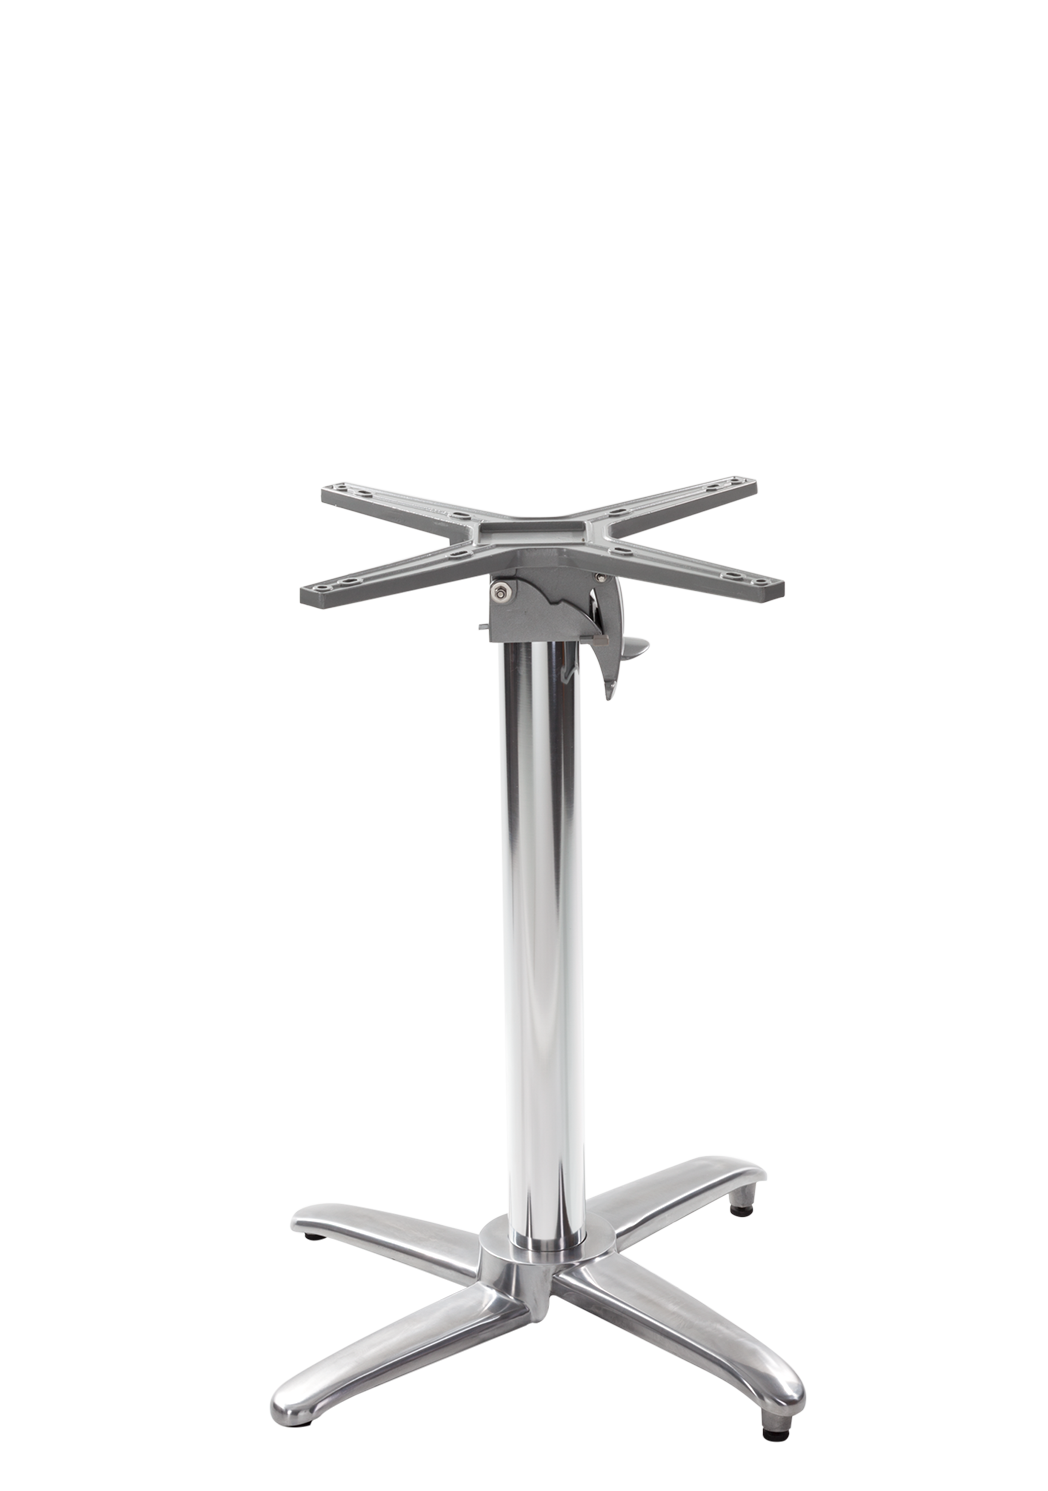 Aluminium All Weather Table Base - Flip Top - Height - 730 Mm